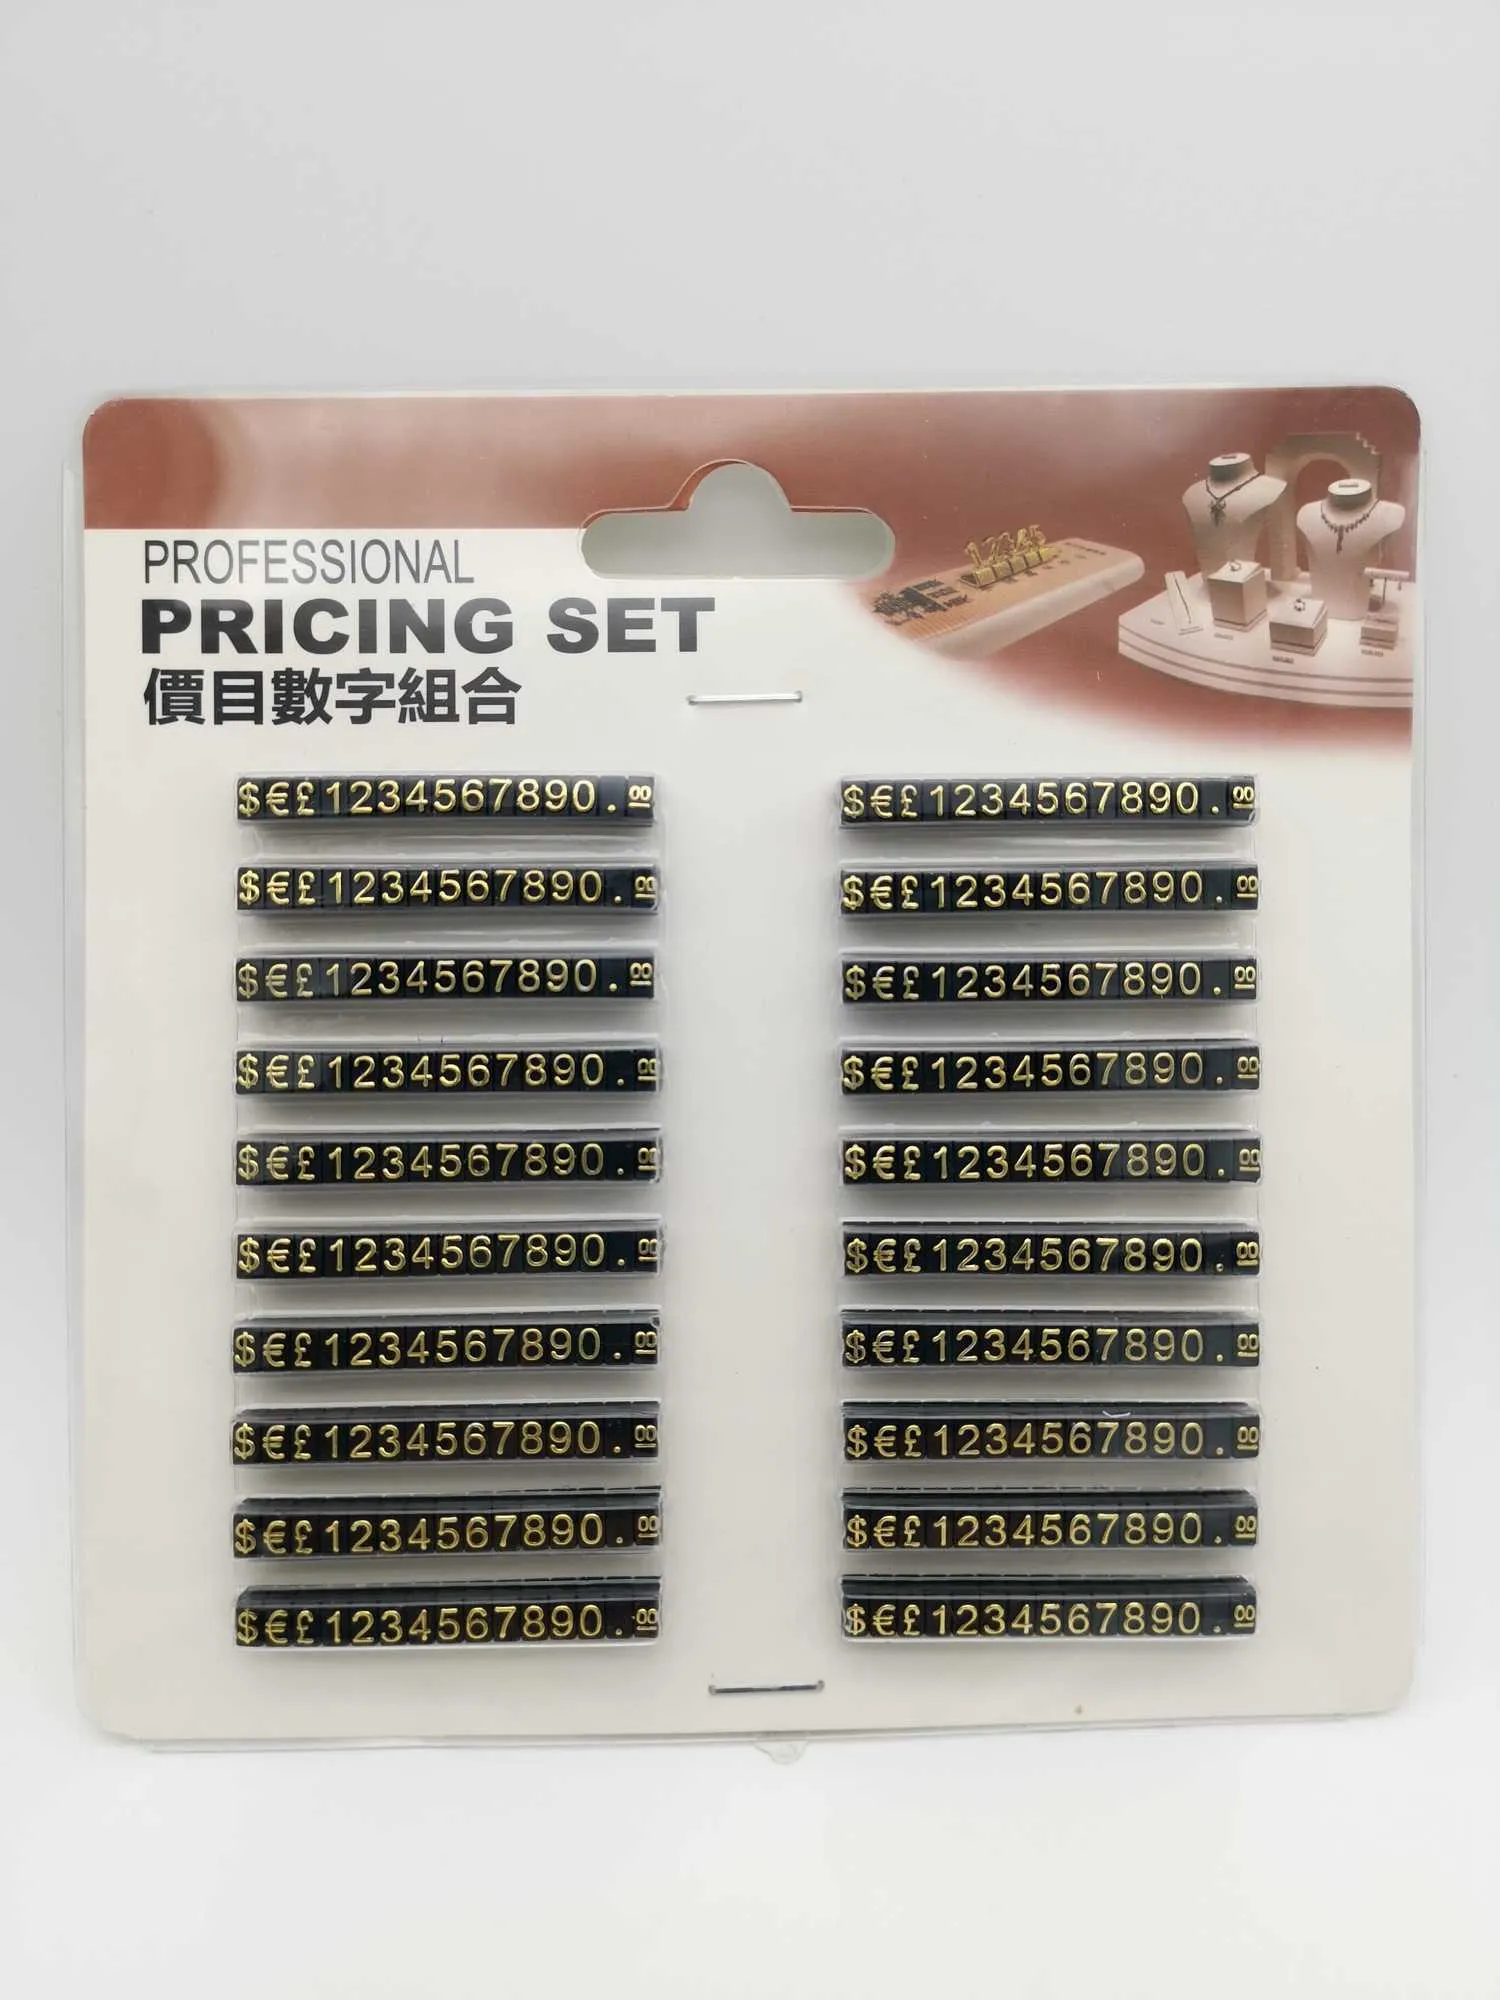 Yen Dollar GBP Euro Currency Price Strip Digital Plastic Jewelry Price Tags Display Numbers Pricing Cubes For Watch Jewelry Shop